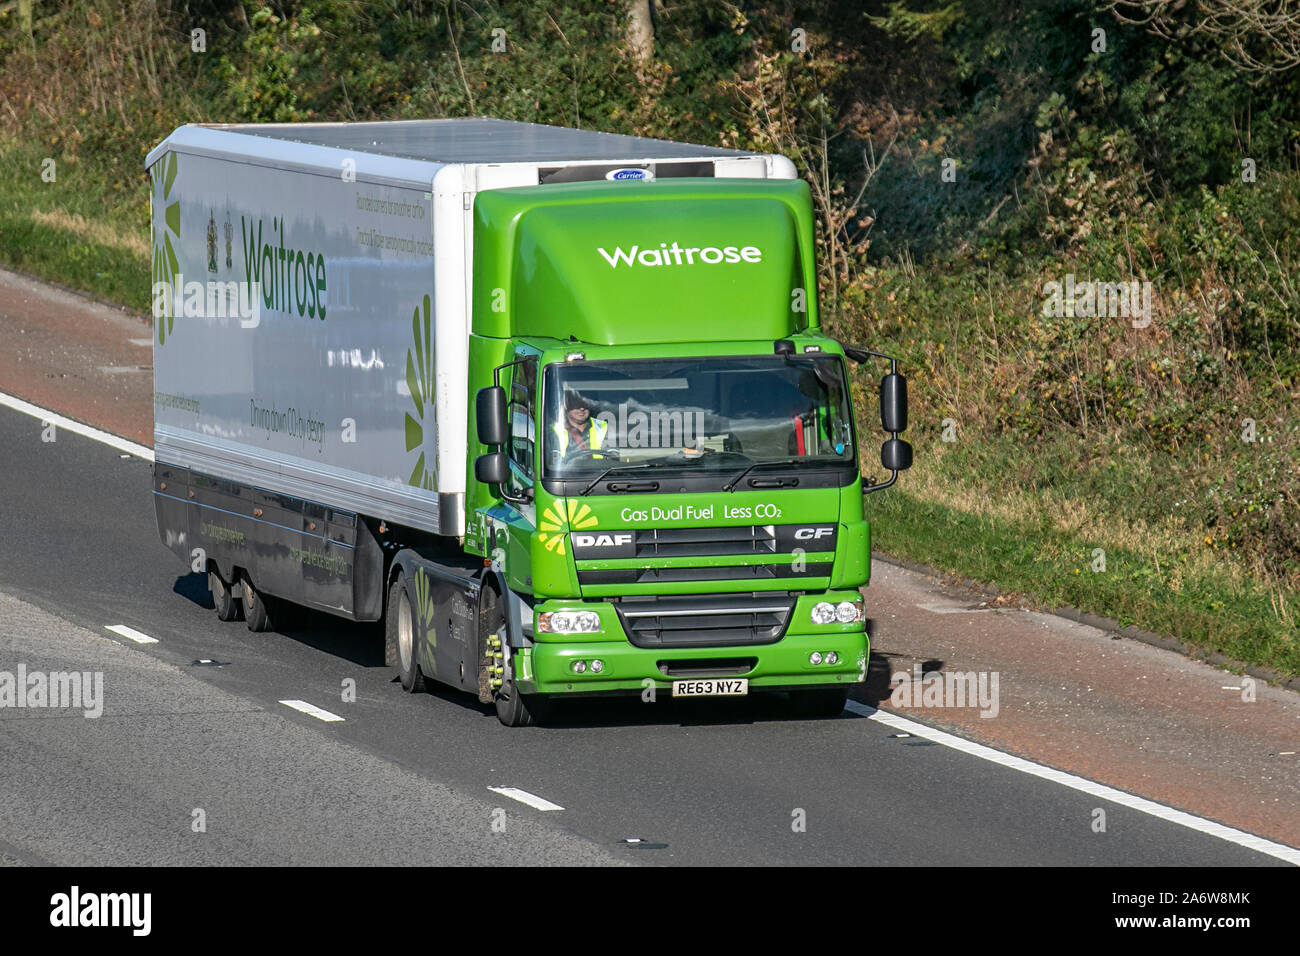 Waitrose green & white food truck delivery; Haulage delivery trucks, lorry, transportation, truck, cargo, vehicle, delivery, commercial transport, industry, supply chain freight, on the M6 at Lancaster, UK Stock Photo